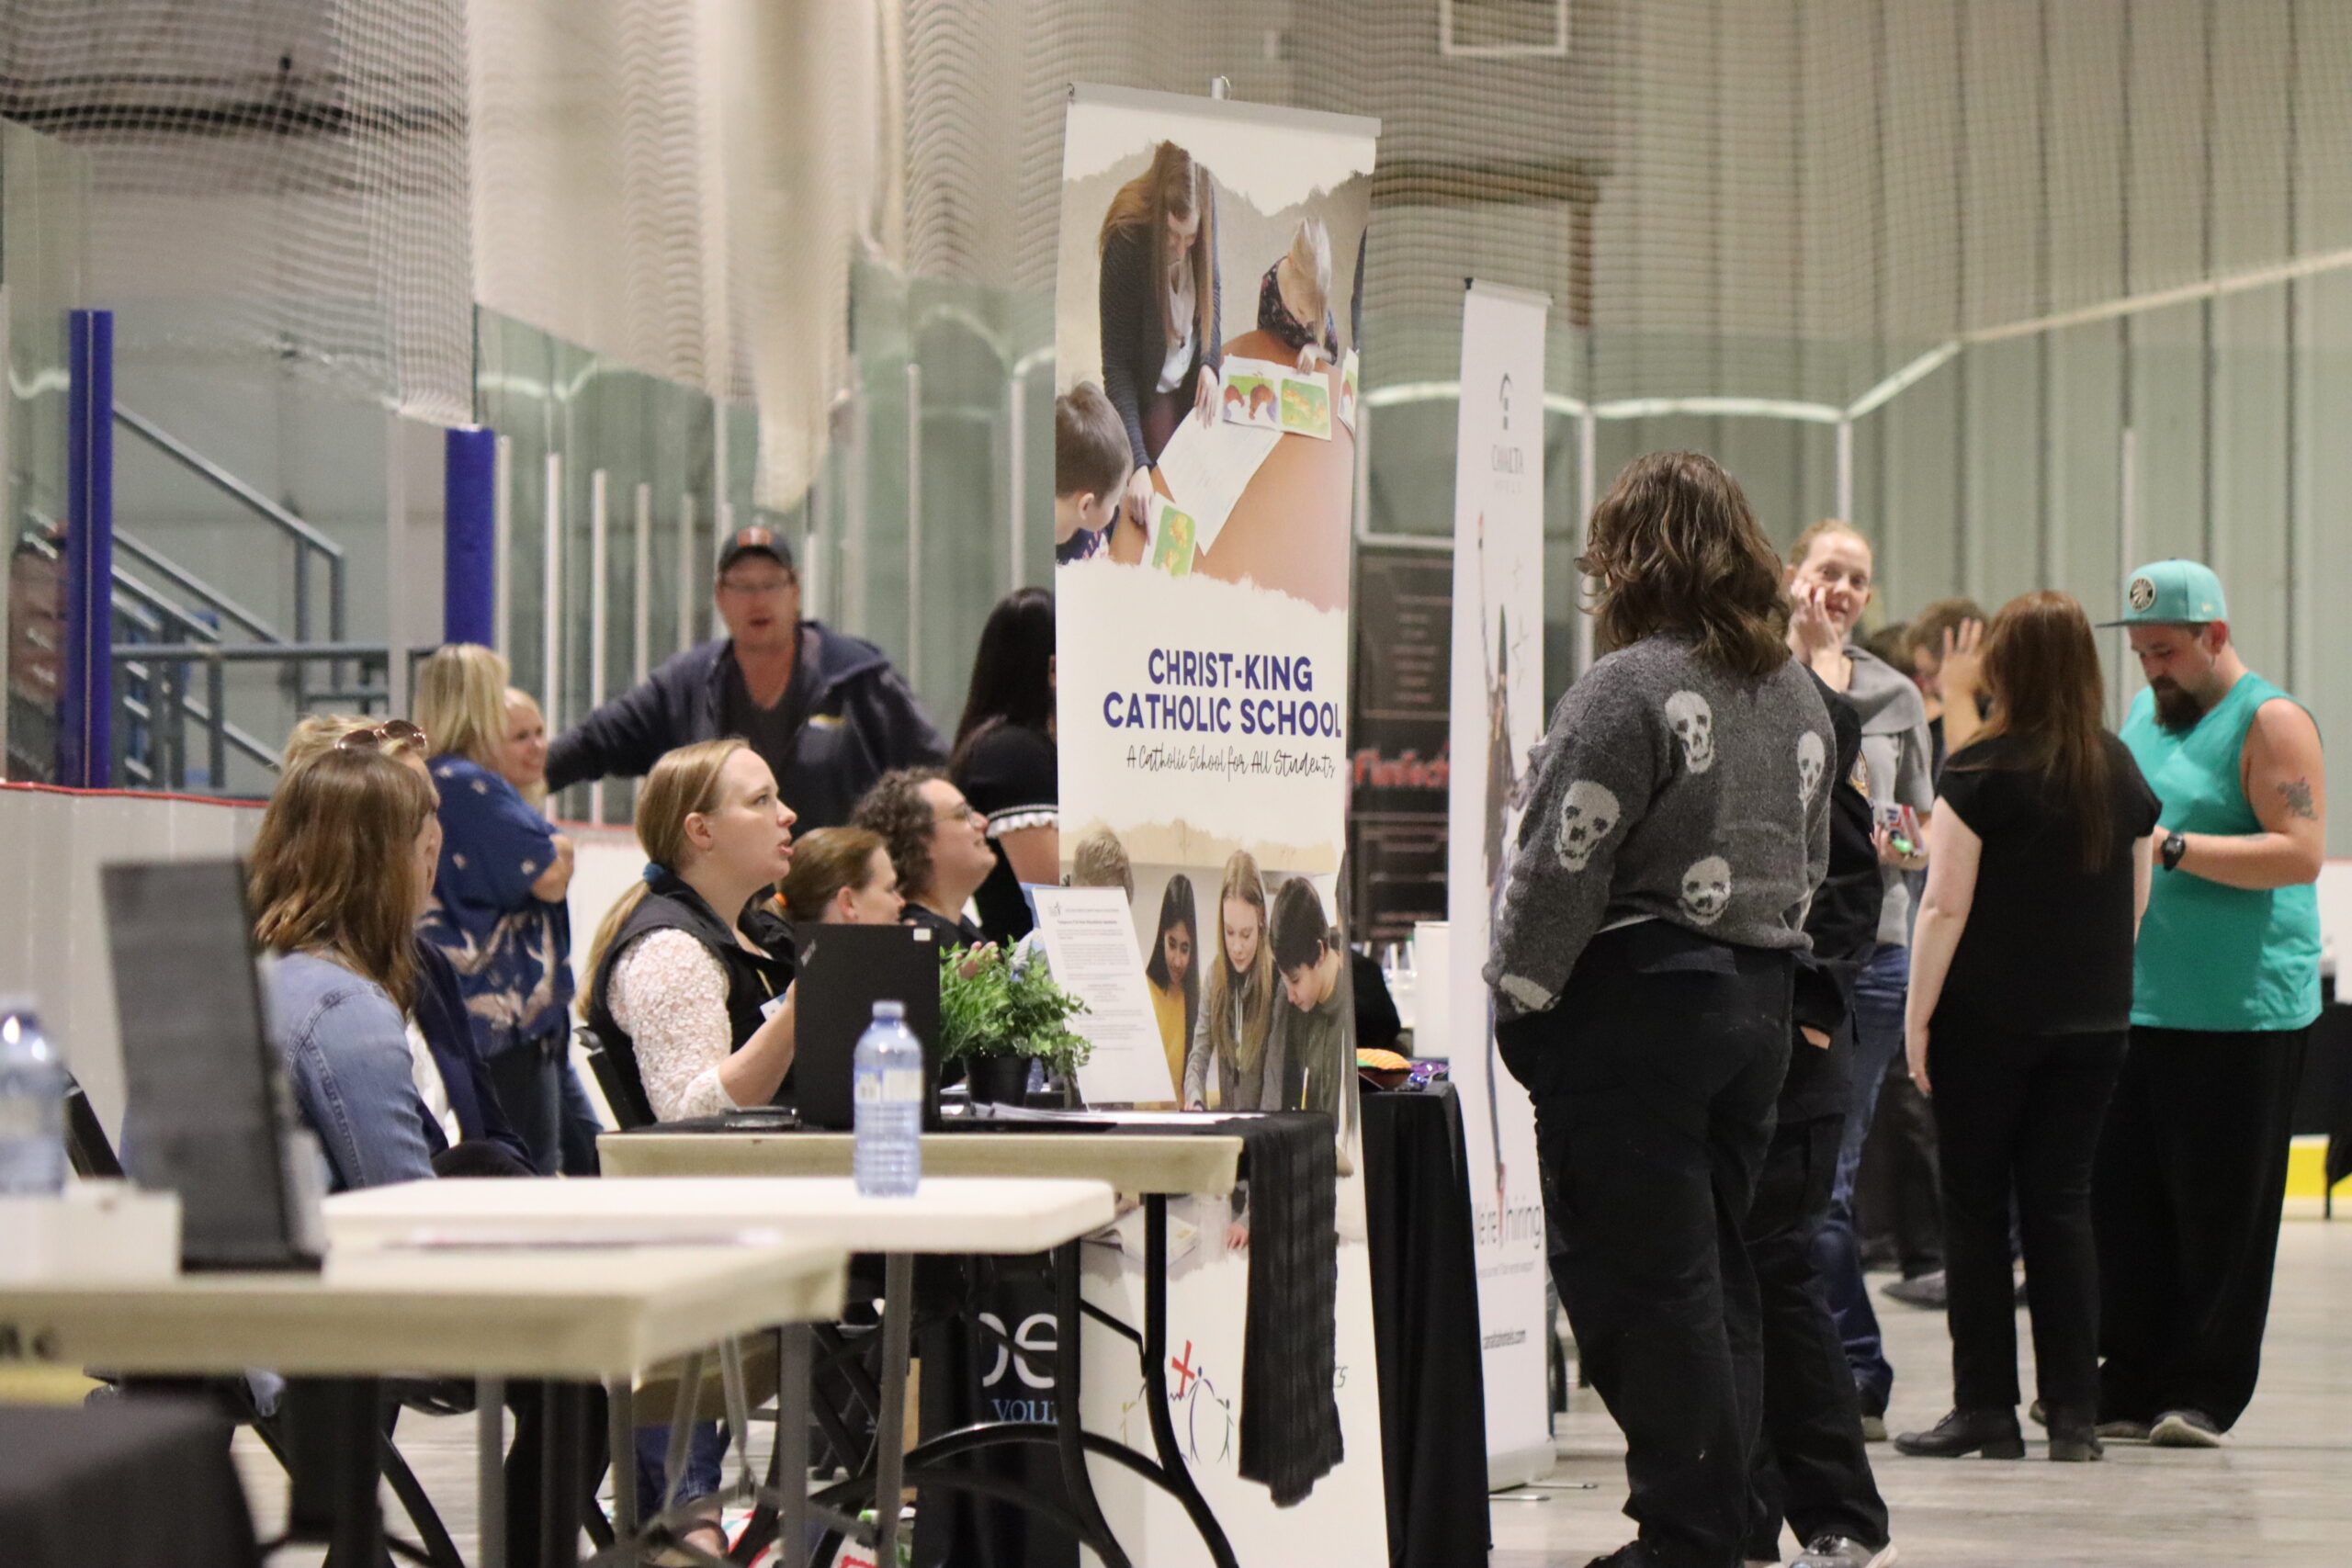 Spring Employment Fair Tuesday, March 19 - 7:00p.m. to 8:30p.m. Stettler Community Hall